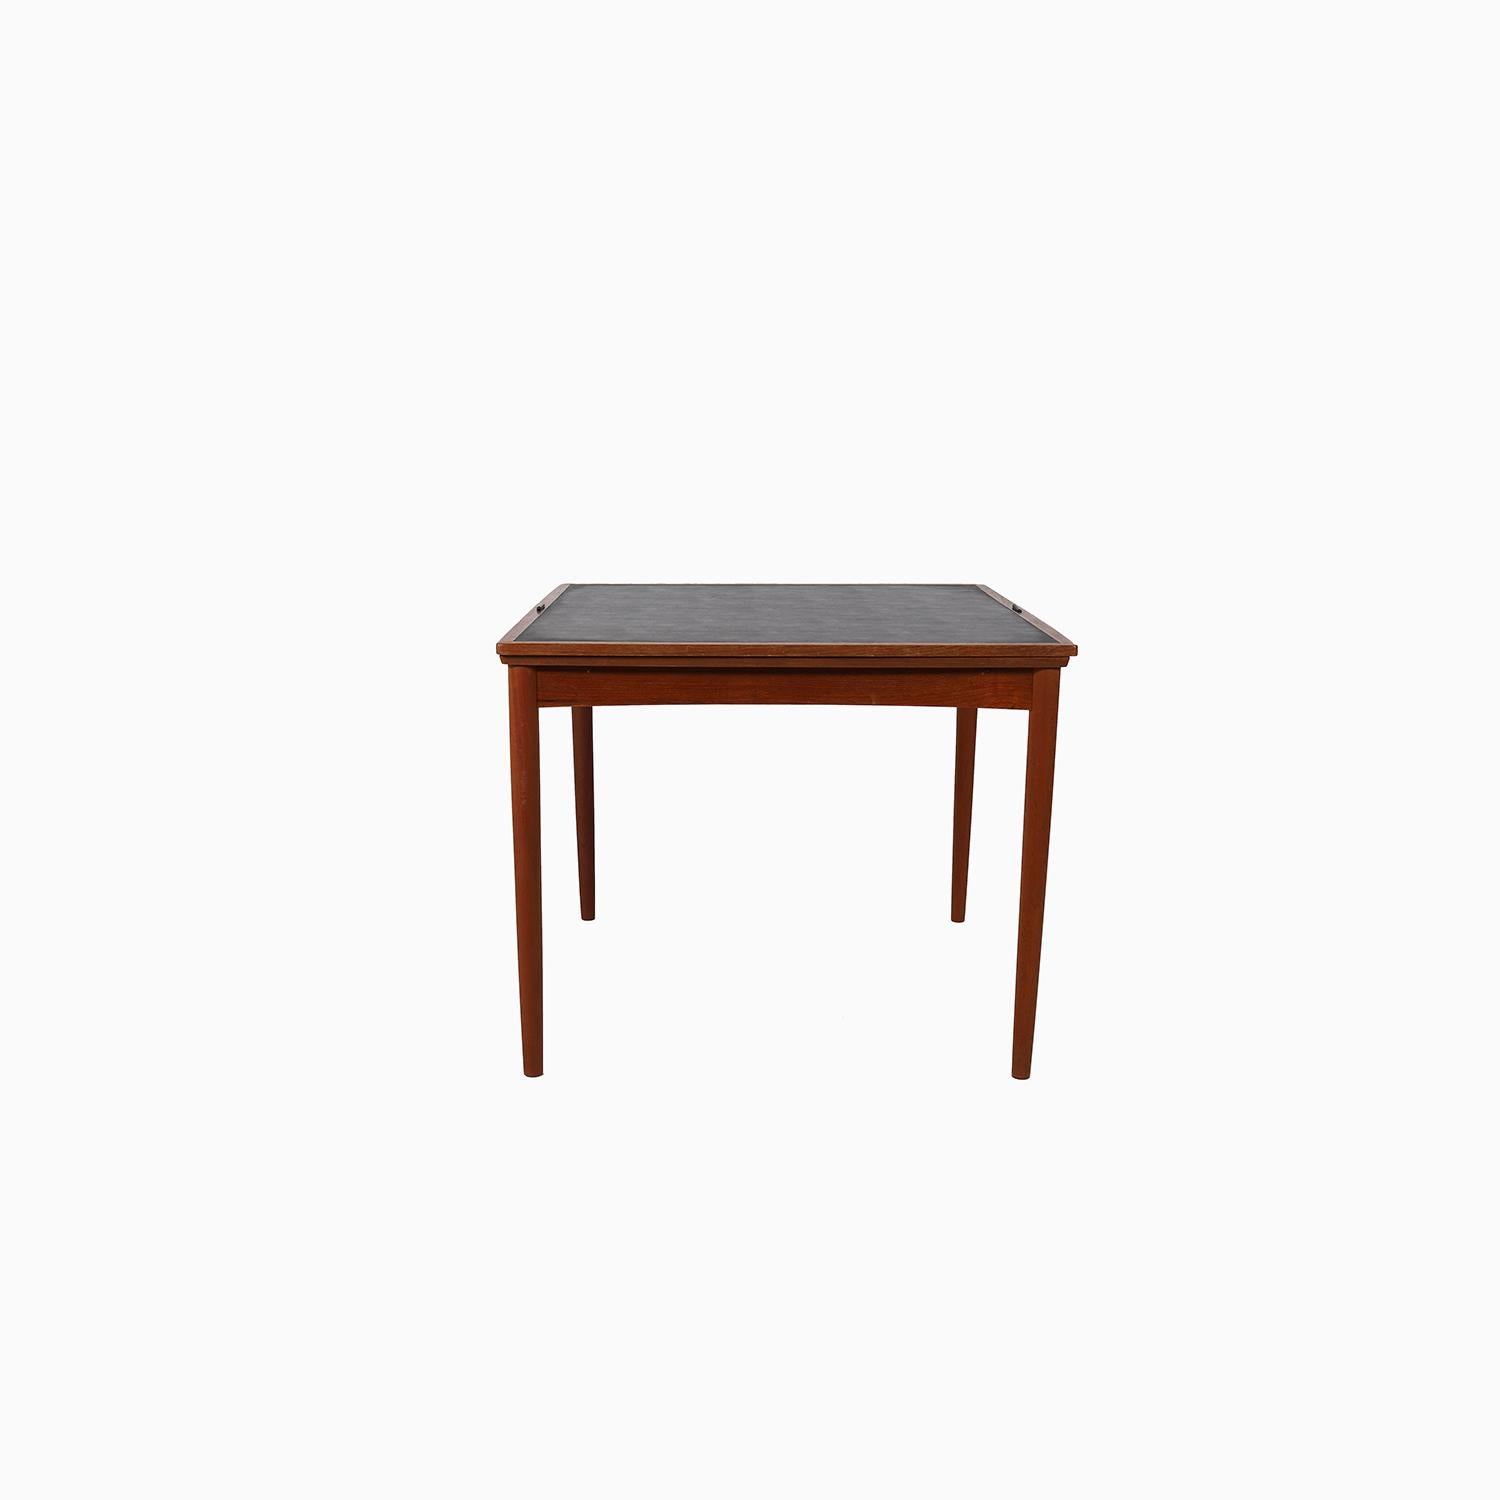 This is a danish modern dining table made from old growth teakwood that has a traditional oil finish.   It boasts a double sided 'flipping' top which has black vinyl on one side (think puzzles or cards) and an oiled teak surface on the other side